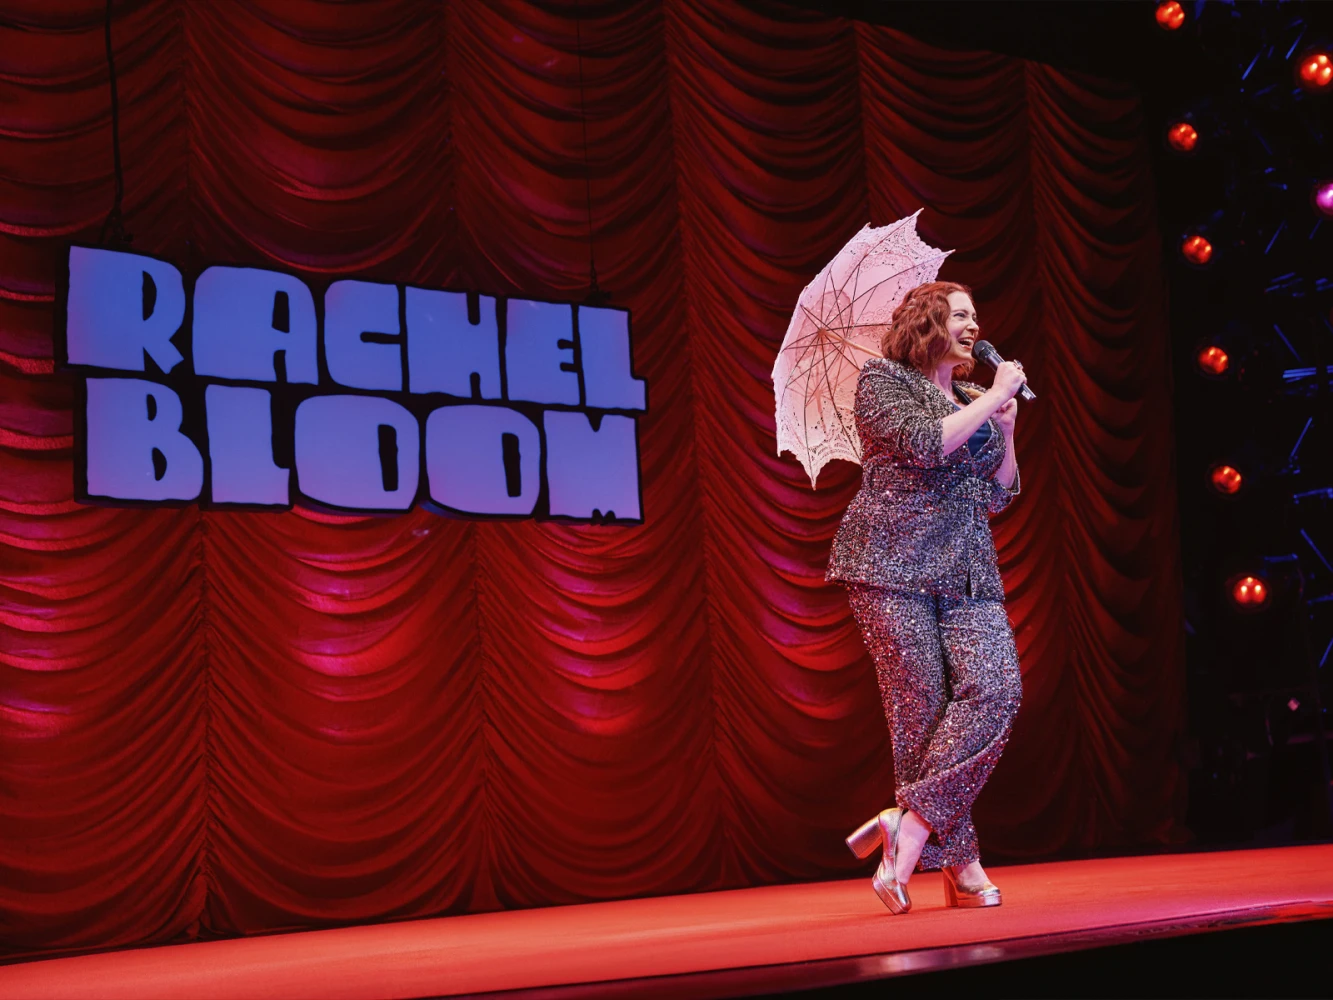 Rachel Bloom: Death, Let Me Do My Show: What to expect - 1